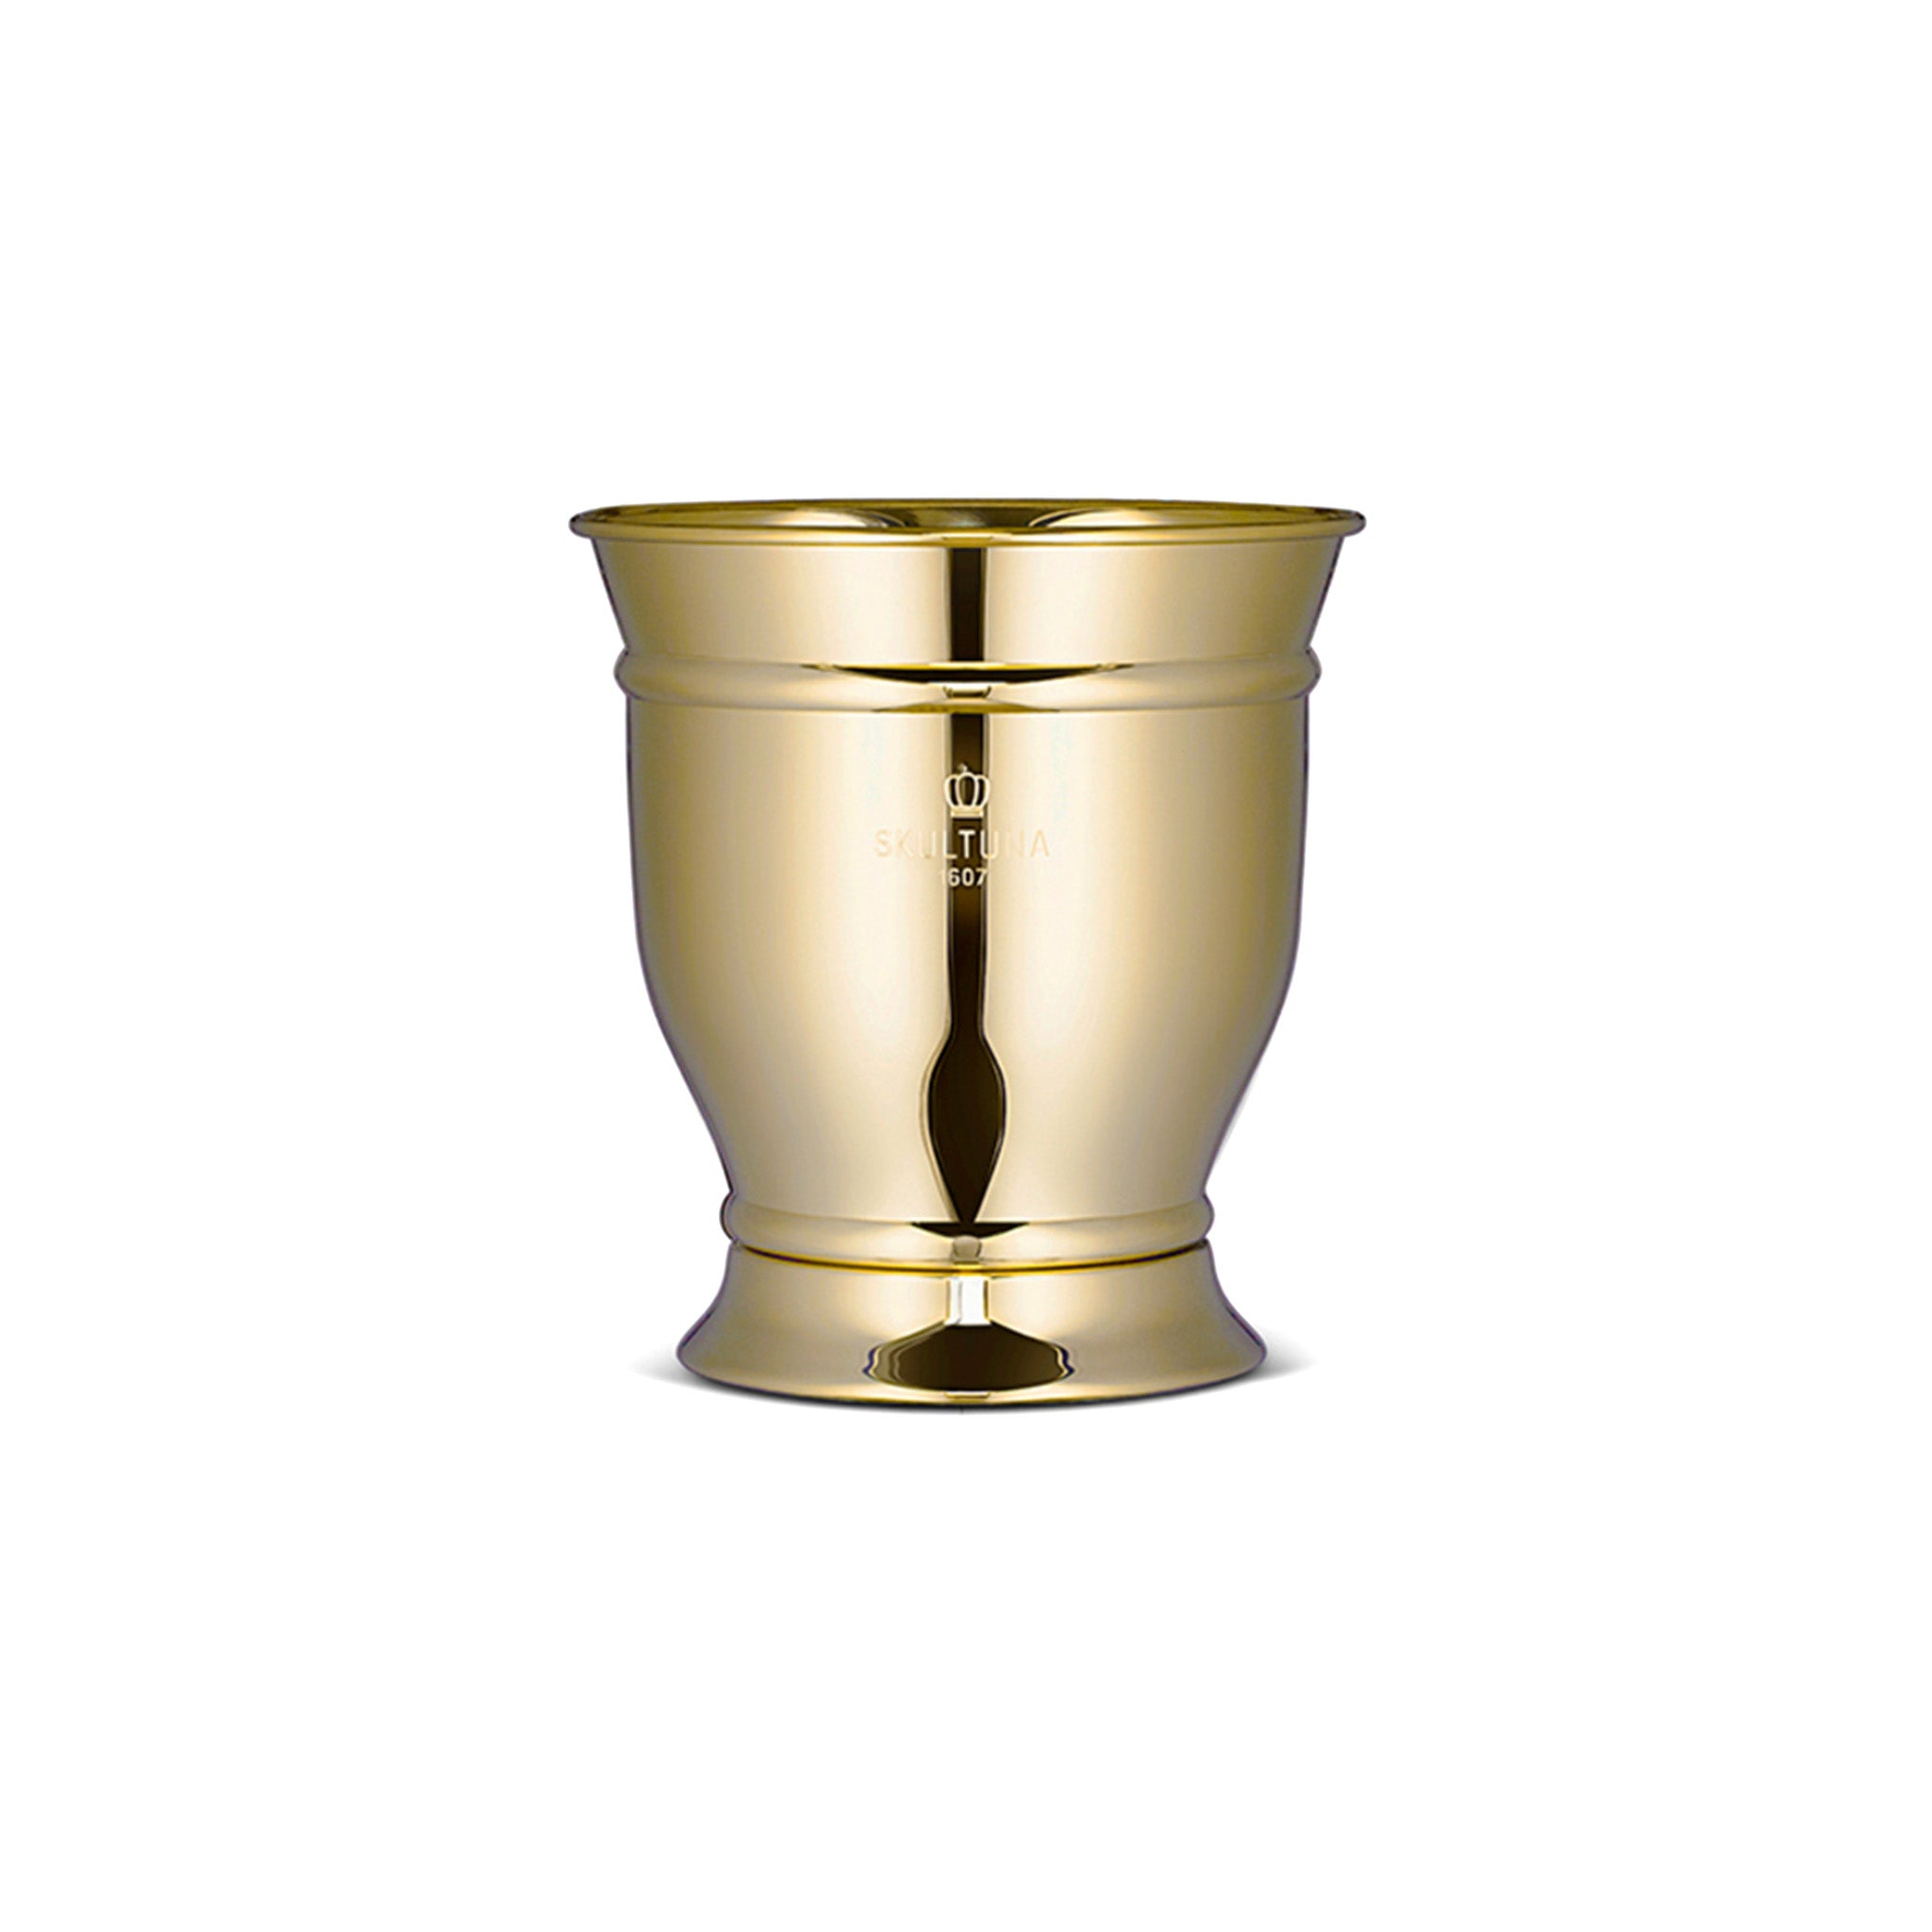 a brass champagne and wine cooler sitting on top of a white surface